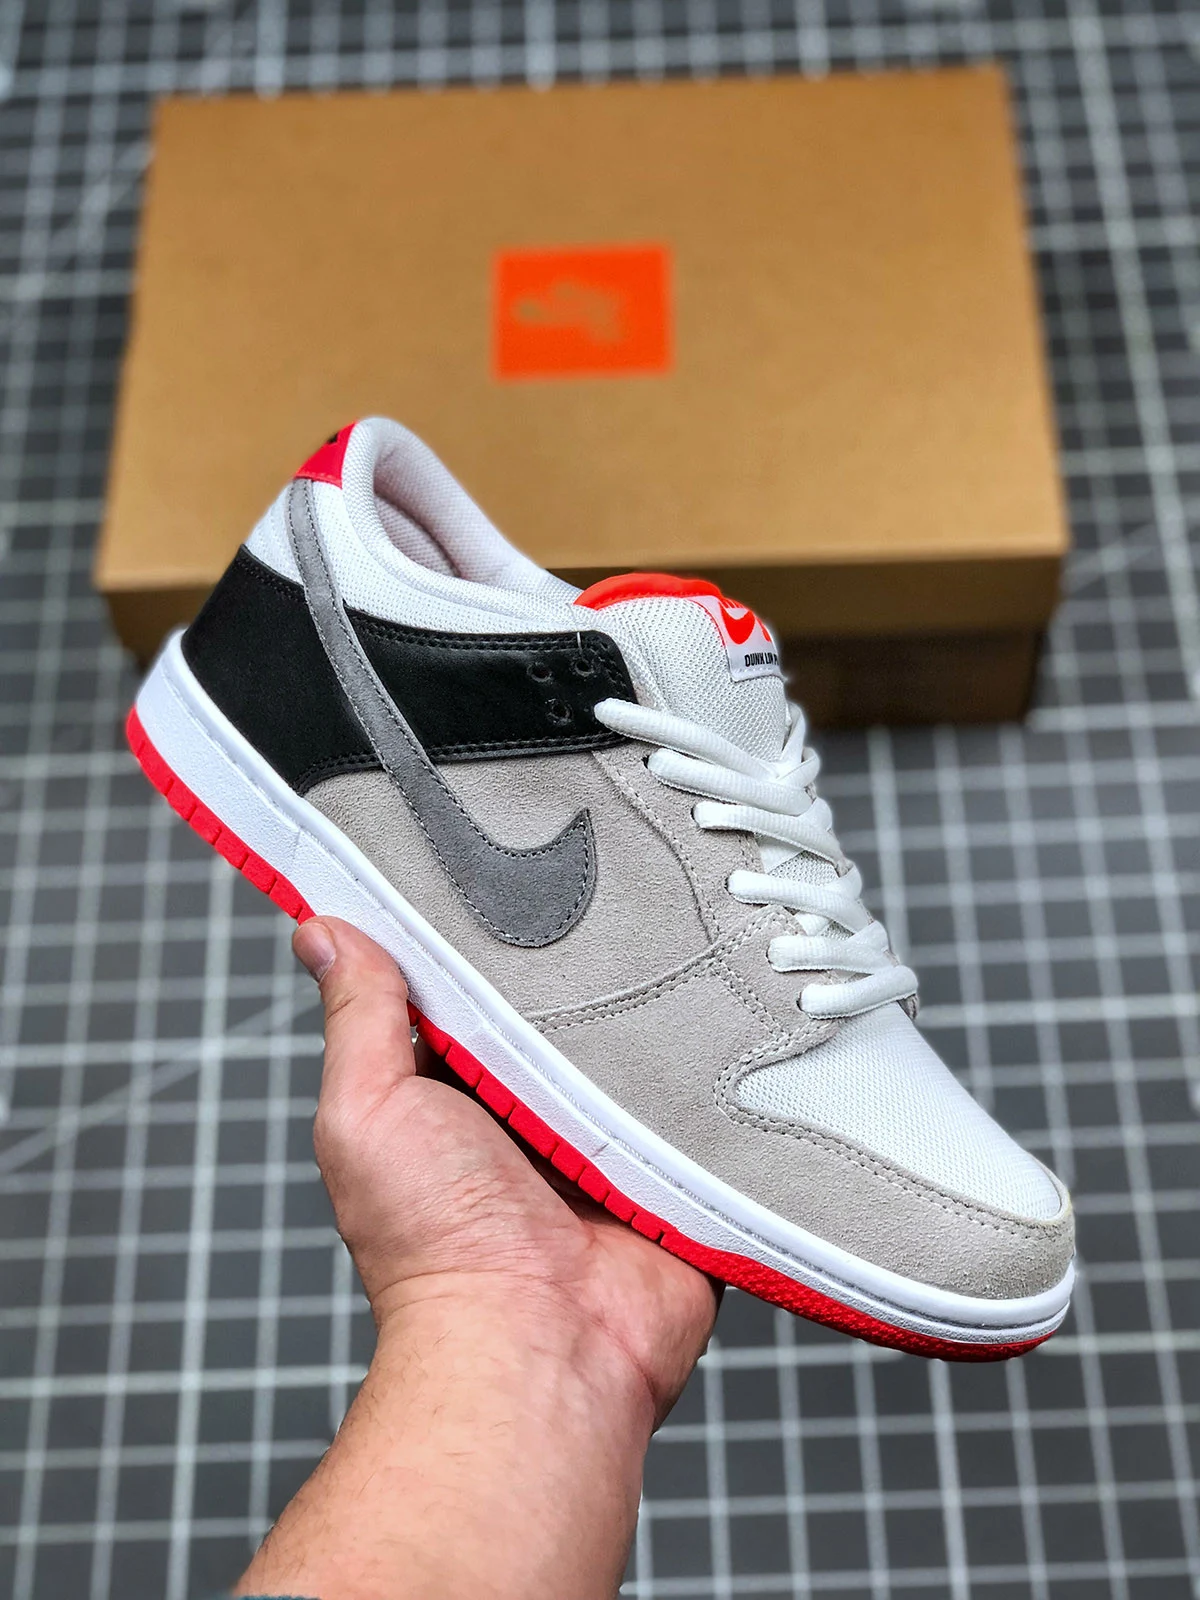 Nike SB Dunk Low Infrared Grey Black CD2563-004 For Sale